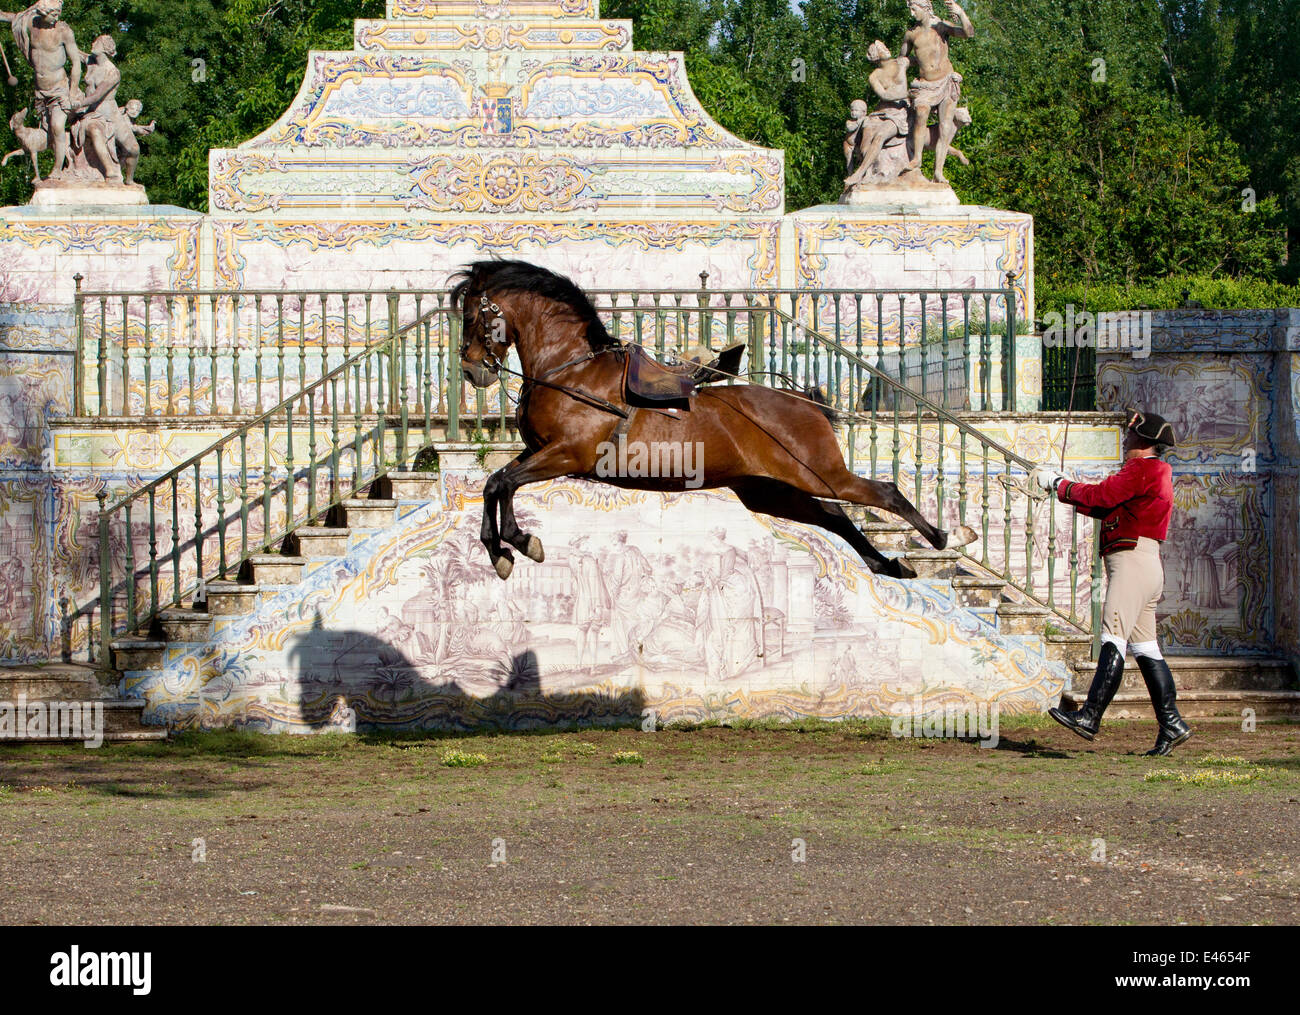 Lusitano horse, man training stallion in dressage steps, the high leap, Royal Riding School, Lisbon, Portugal, May 2011, model released Stock Photo